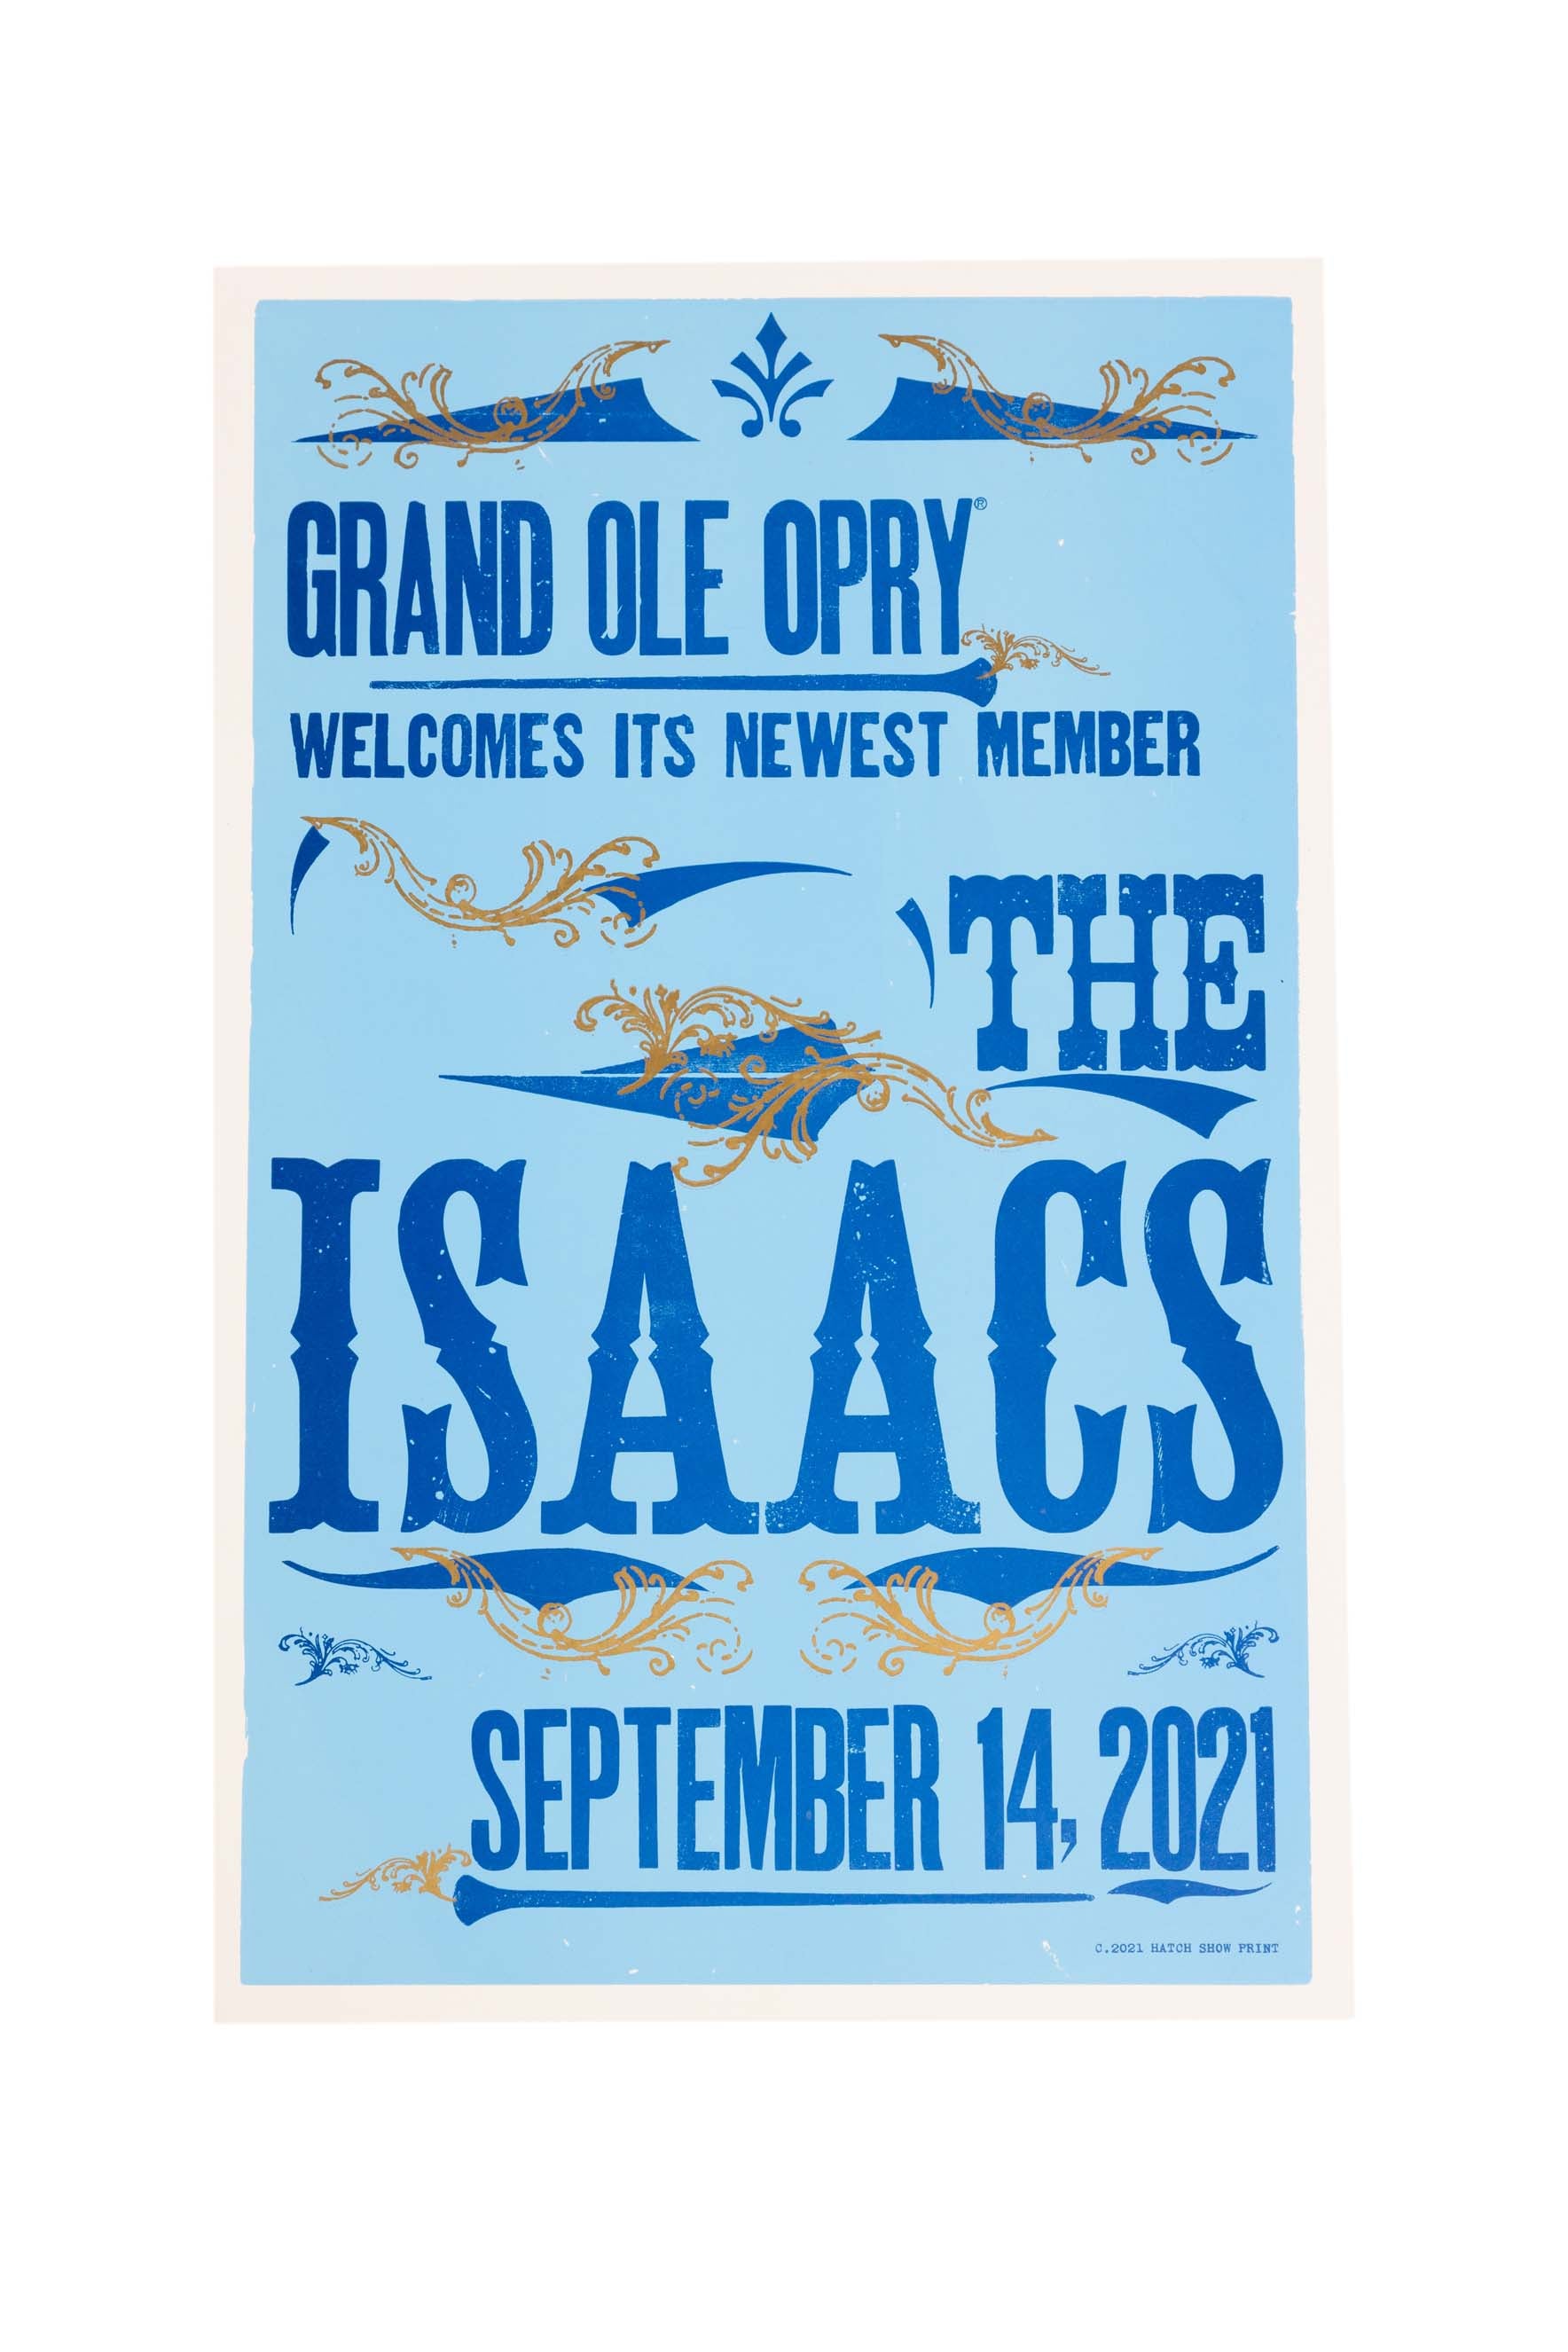 The Issacs Official Opry Induction Hatch Show Print